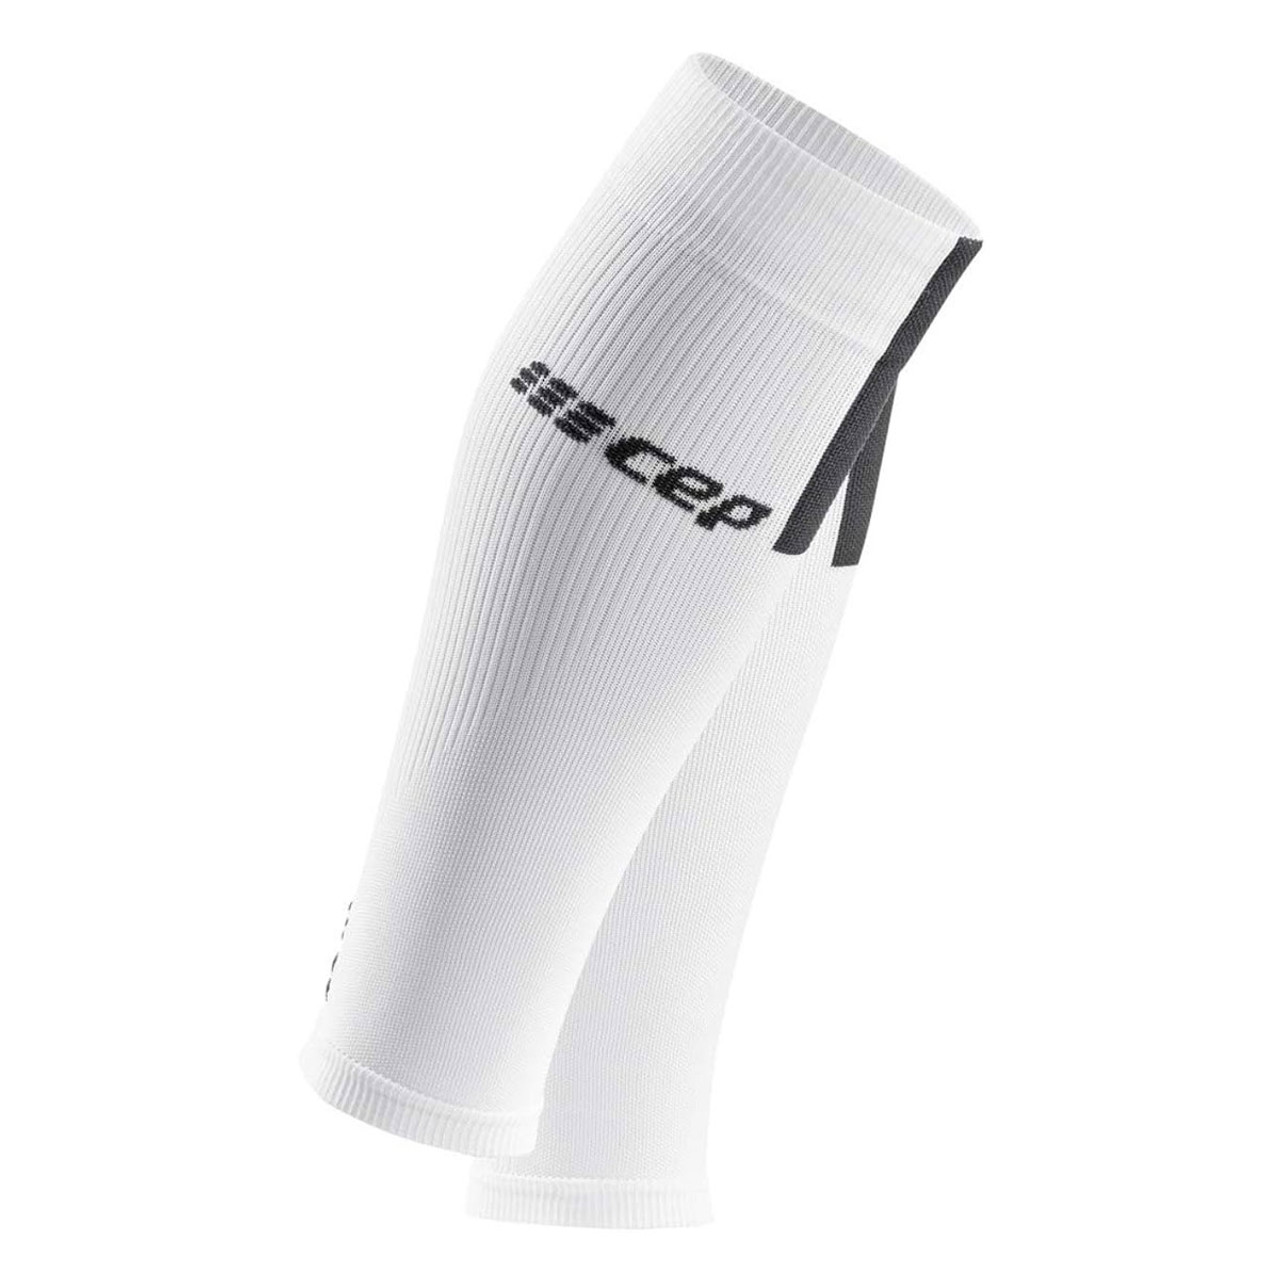 CEP 3 Compression Calf Sleeves Size IV WS408X4